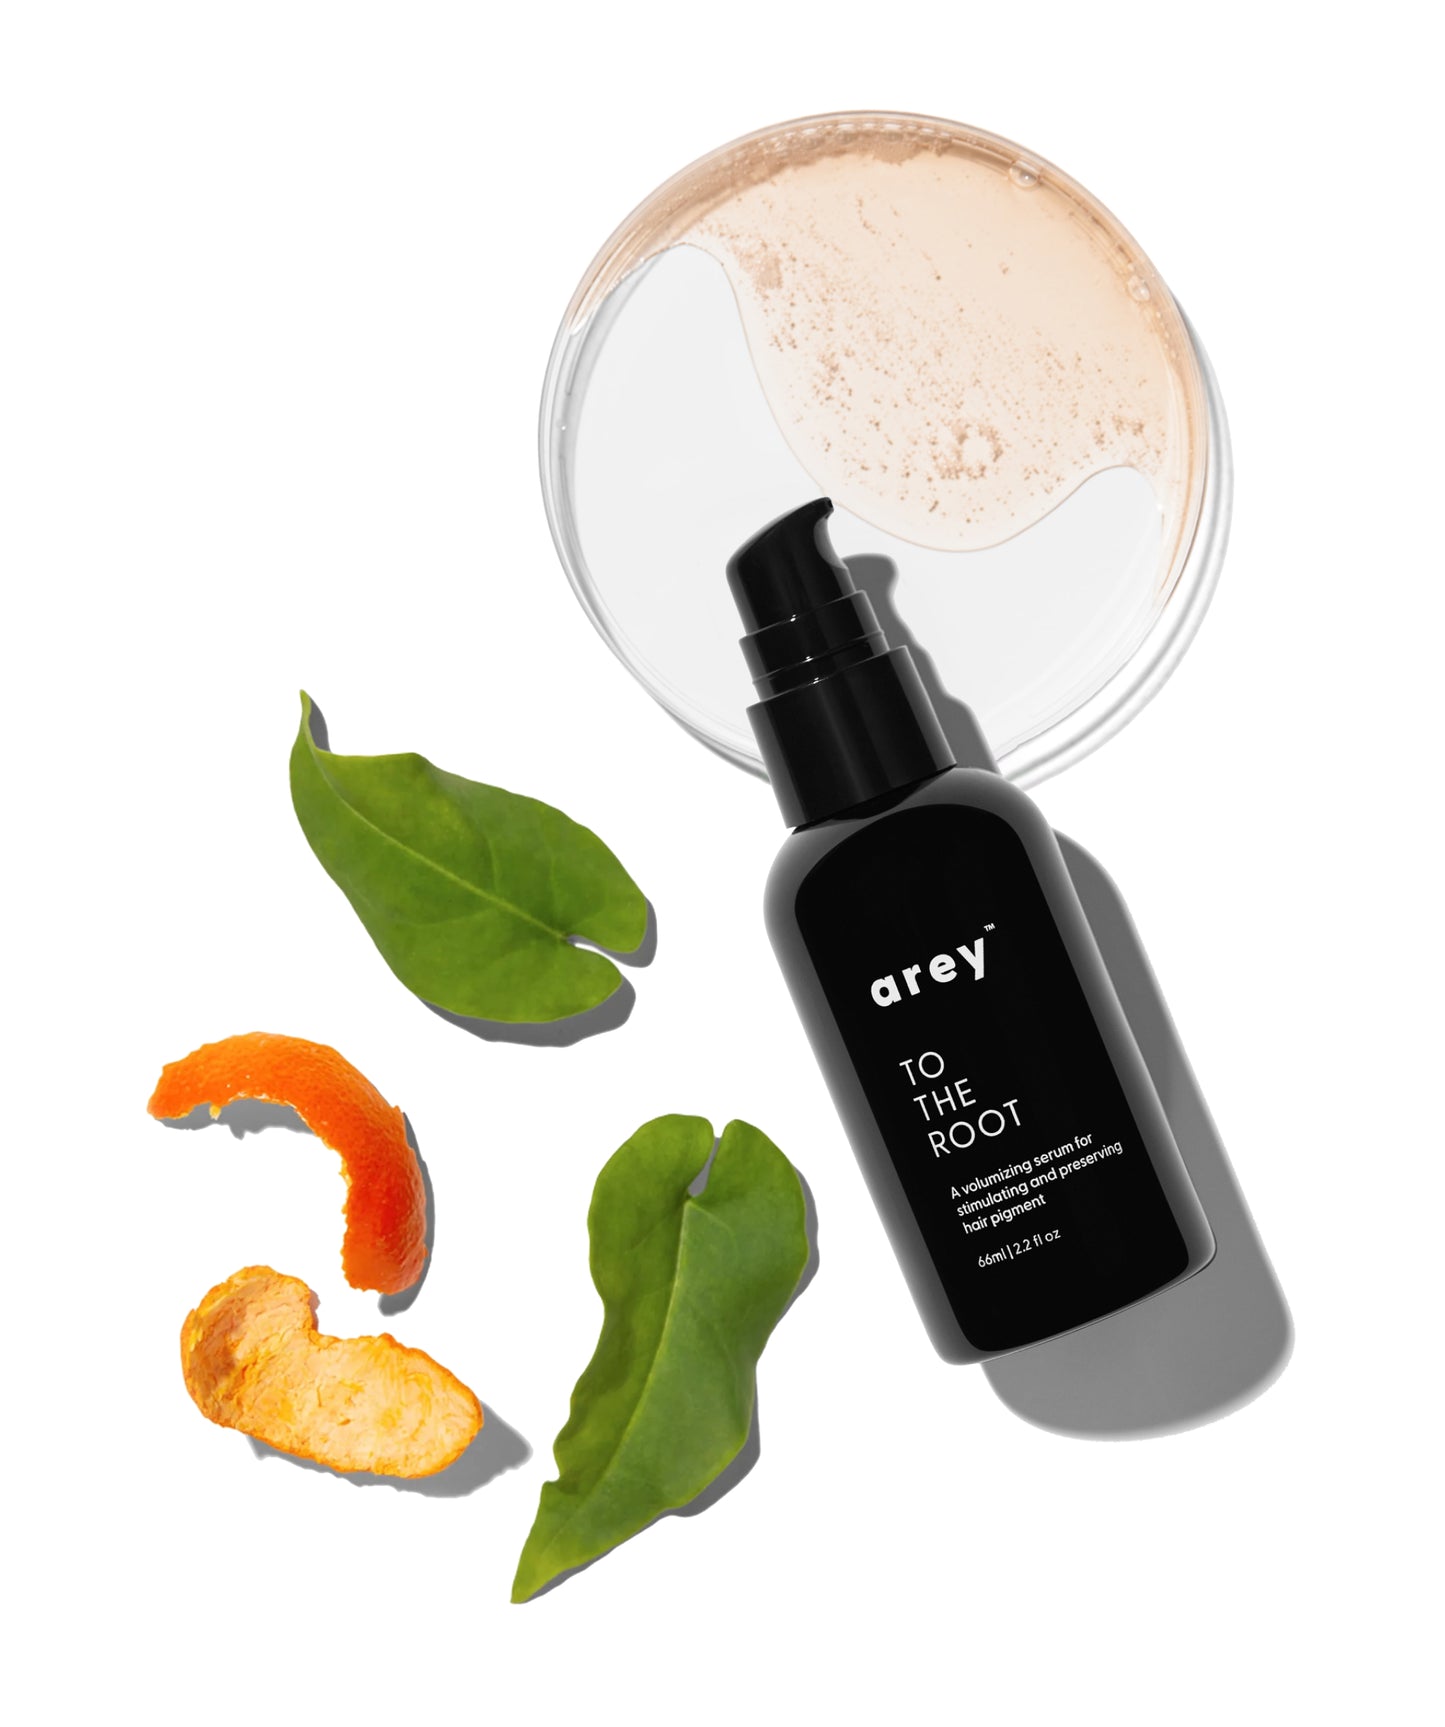 To The Root™ Serum 3-Pack